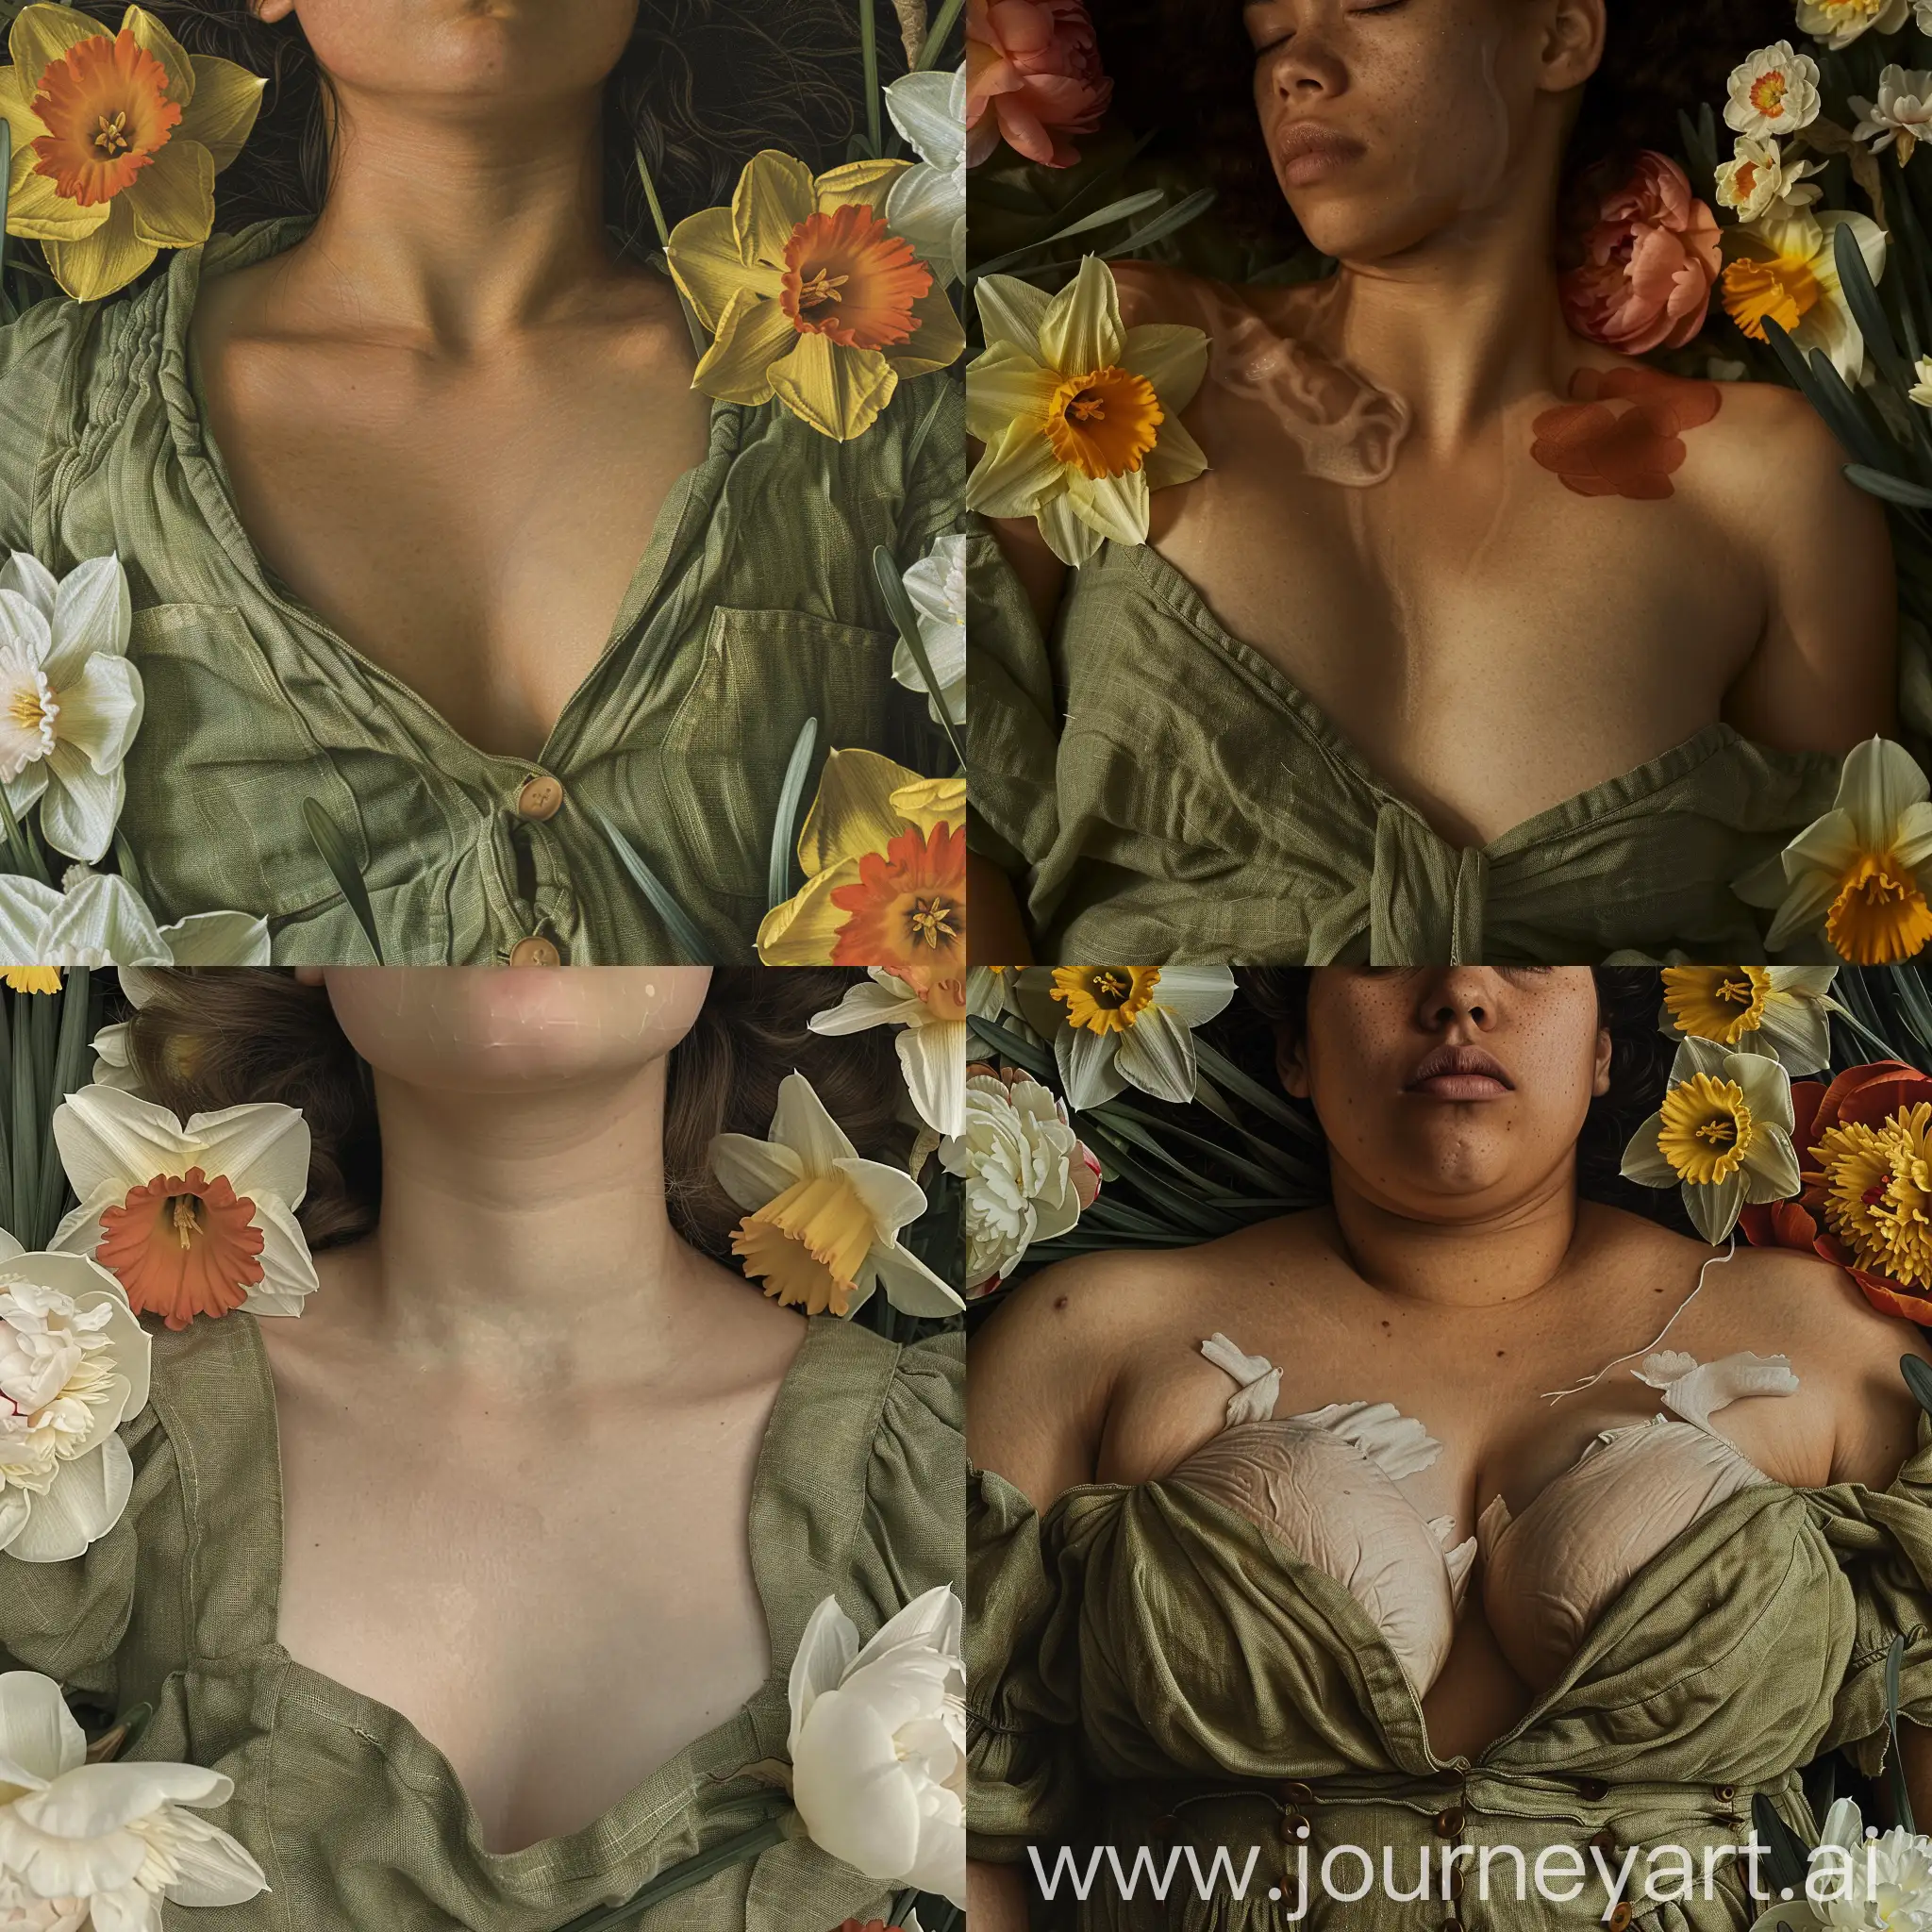 Lena, a worker, is lying in a linen green dress in a field of peonies and daffodils, sleeping. the face is shown close, the chest is large